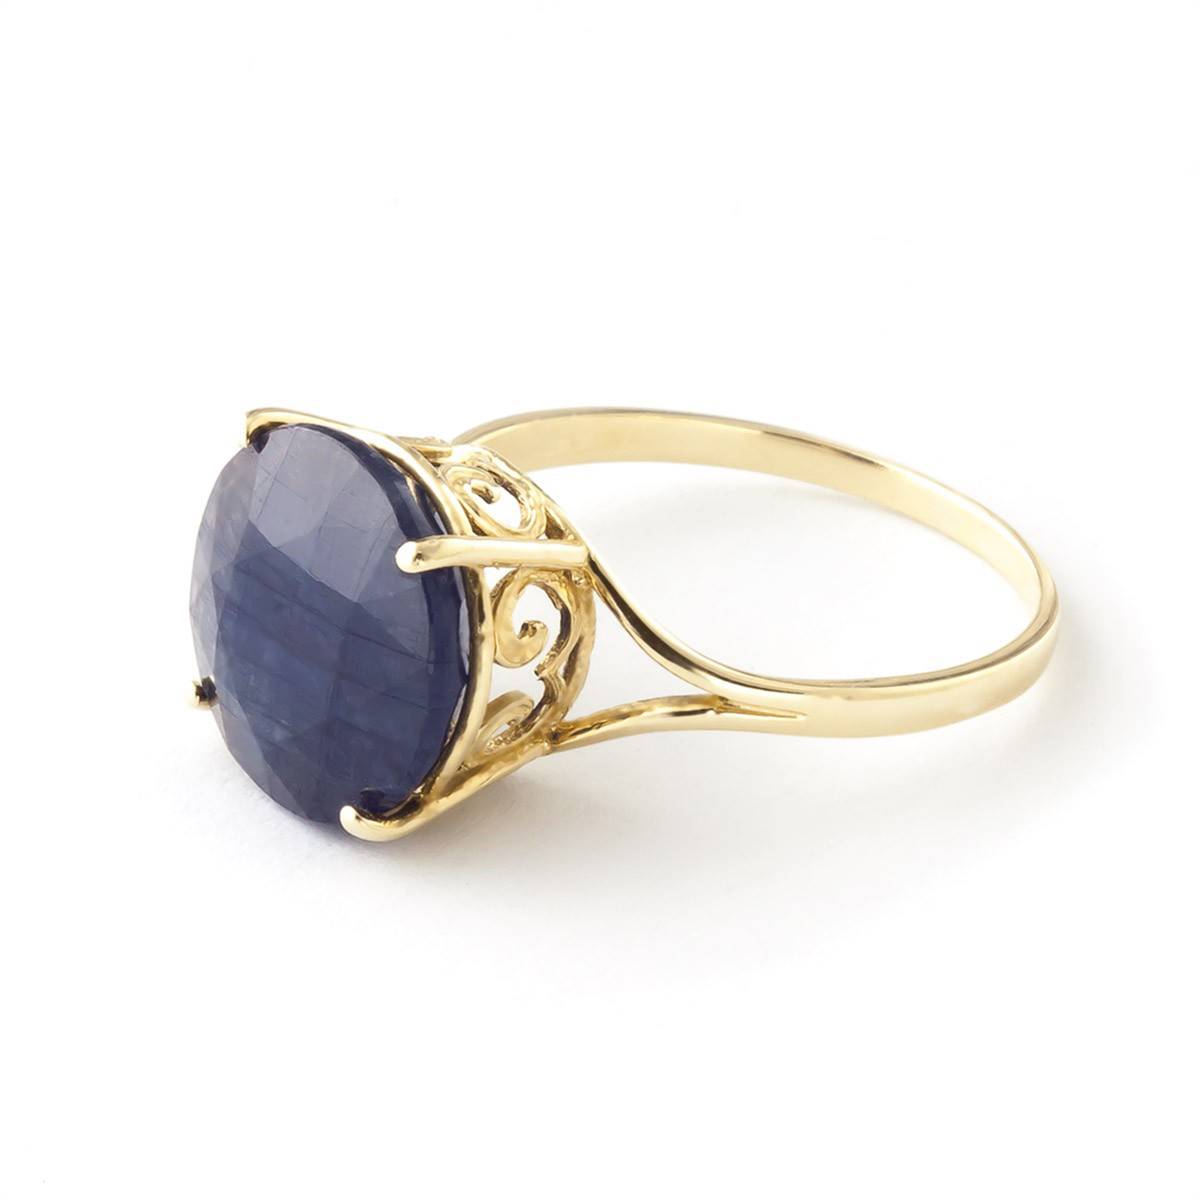 14K Solid Yellow Gold 12.0 mm Round Sapphire Ring